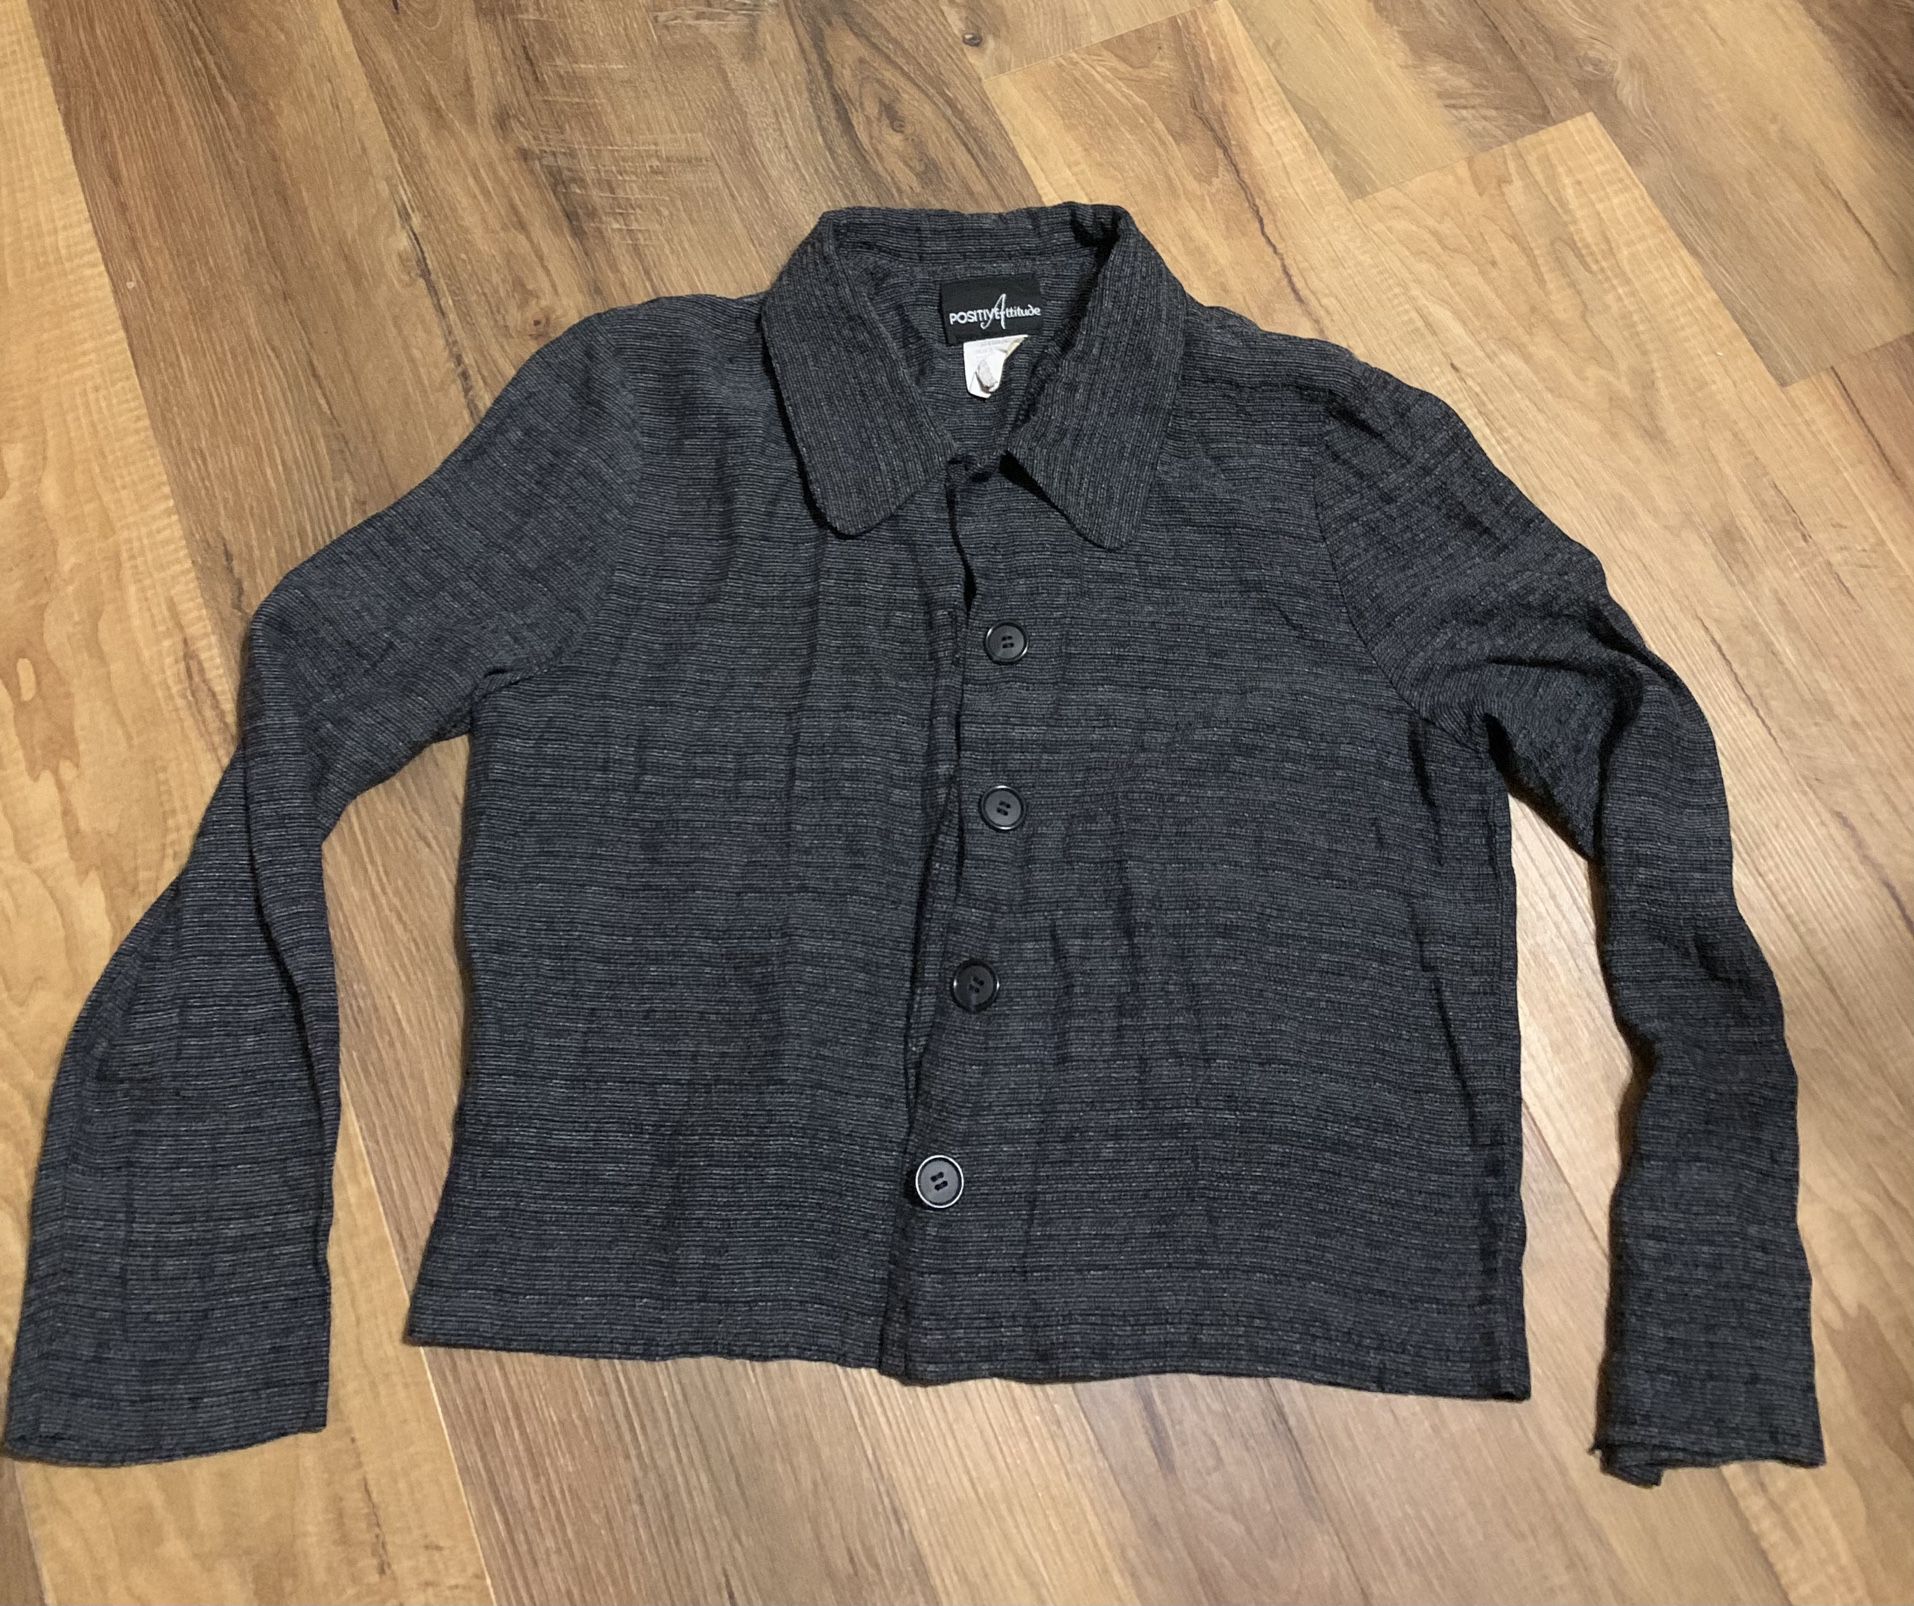 Black short crop top or light jacket size Small